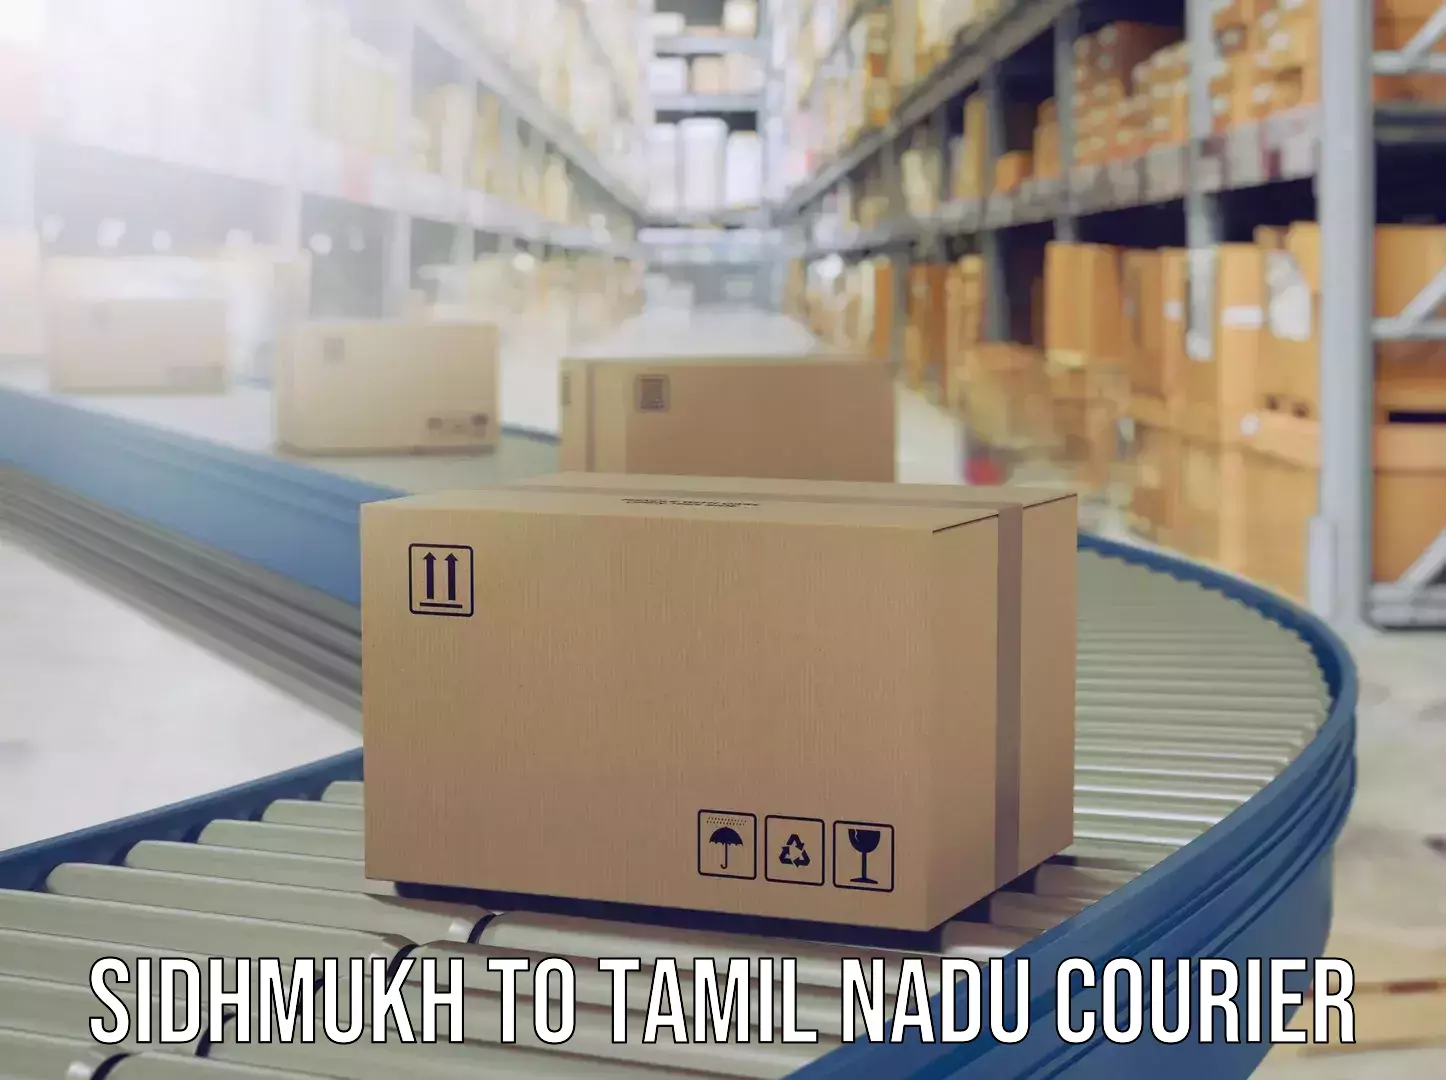 Luggage delivery network Sidhmukh to Tamil Nadu